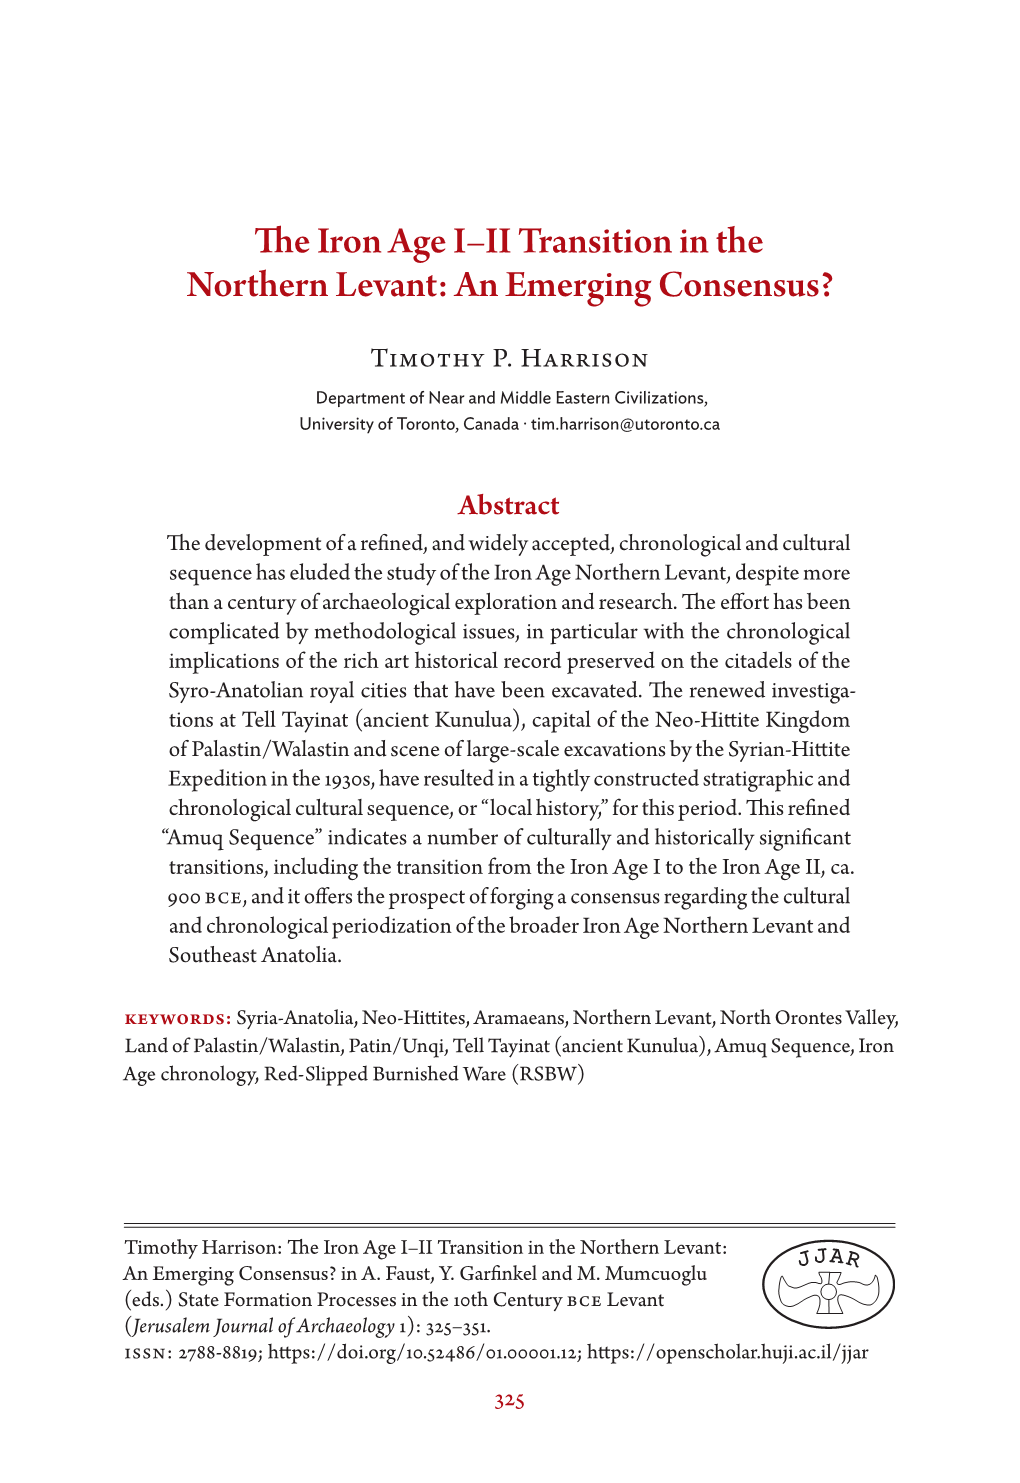 The Iron Age I–II Transition in the Northern Levant: an Emerging Consensus?